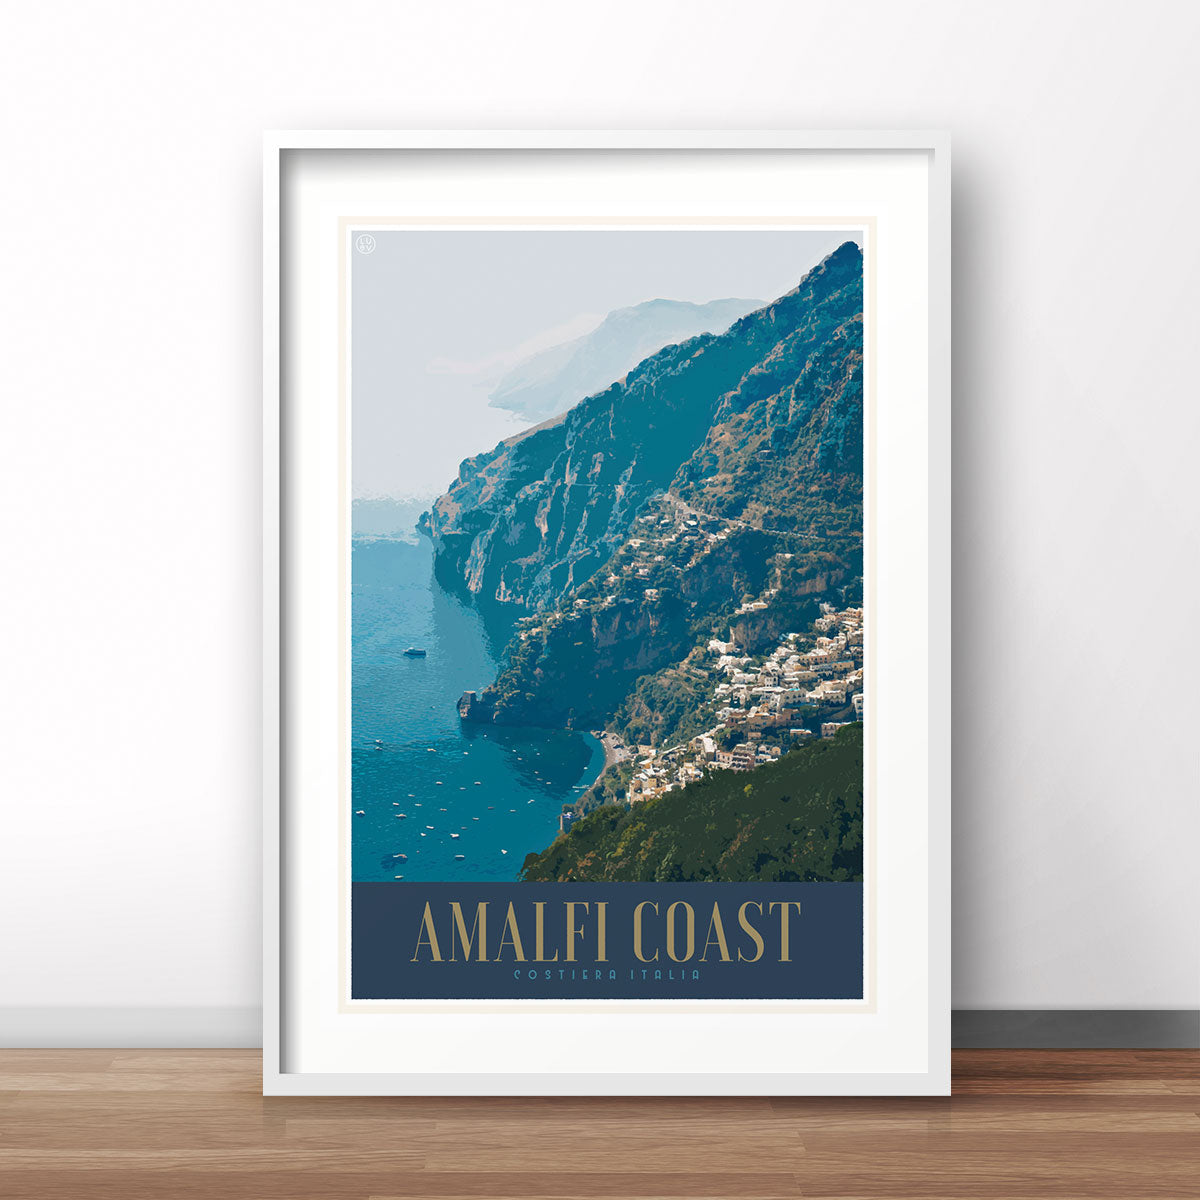 Amalfi Coast Italy vintage travel style poster by places we luv